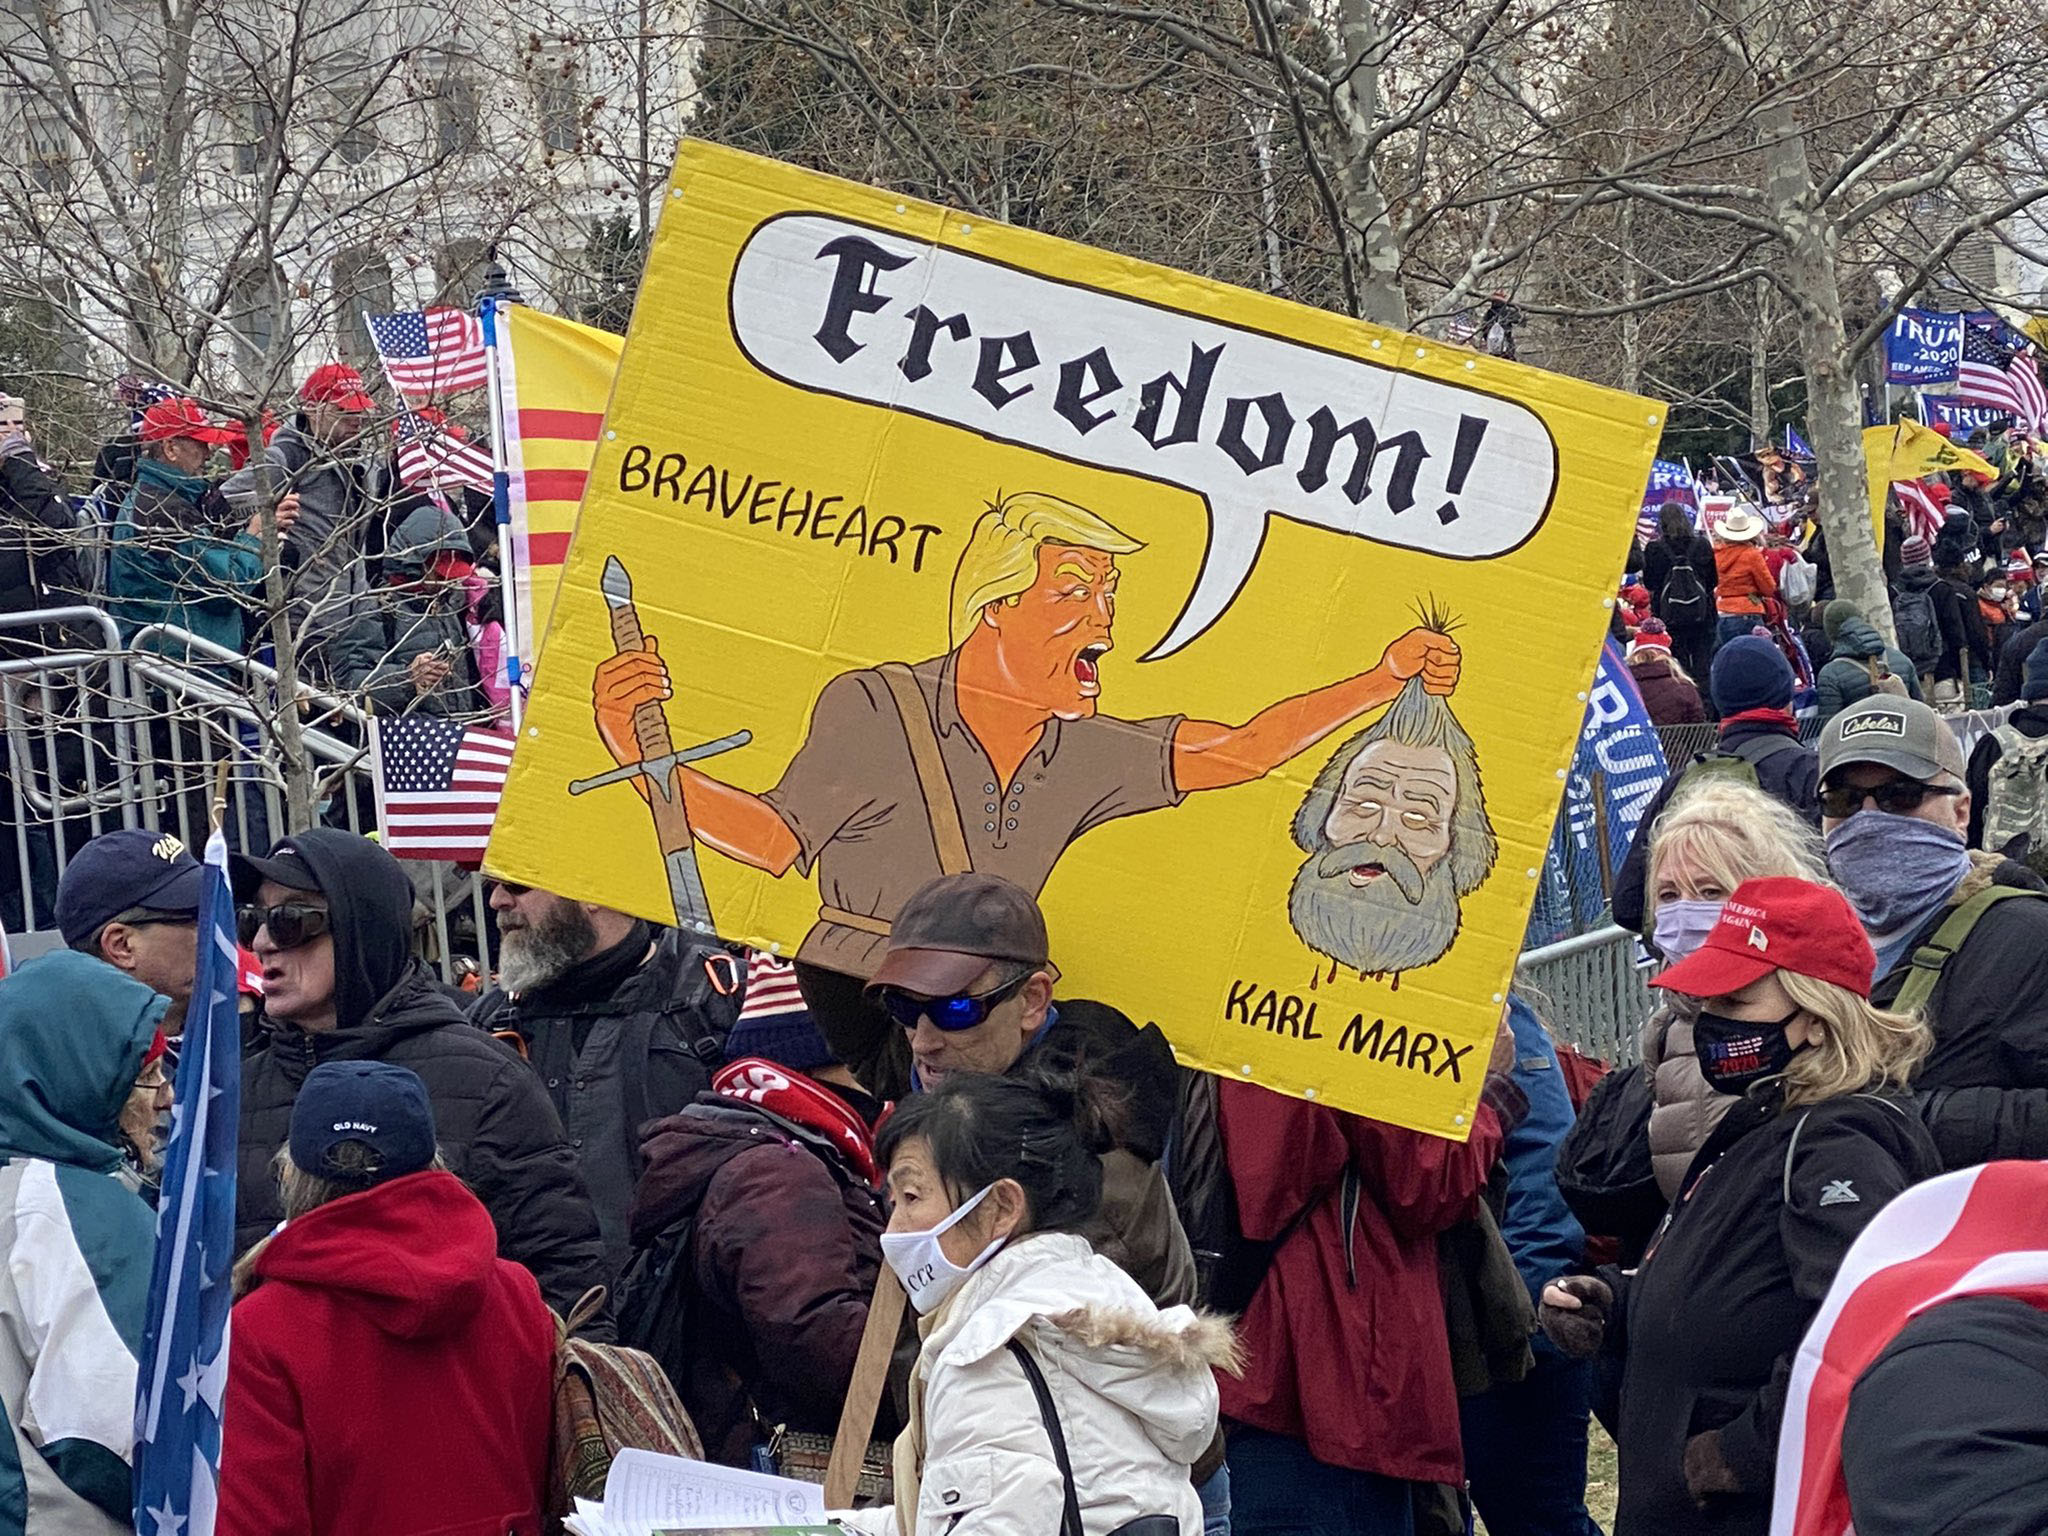 A representative poster from January 6, featuring a mishmash of Trump, the 1995 film Braveheart, and anticommunism.